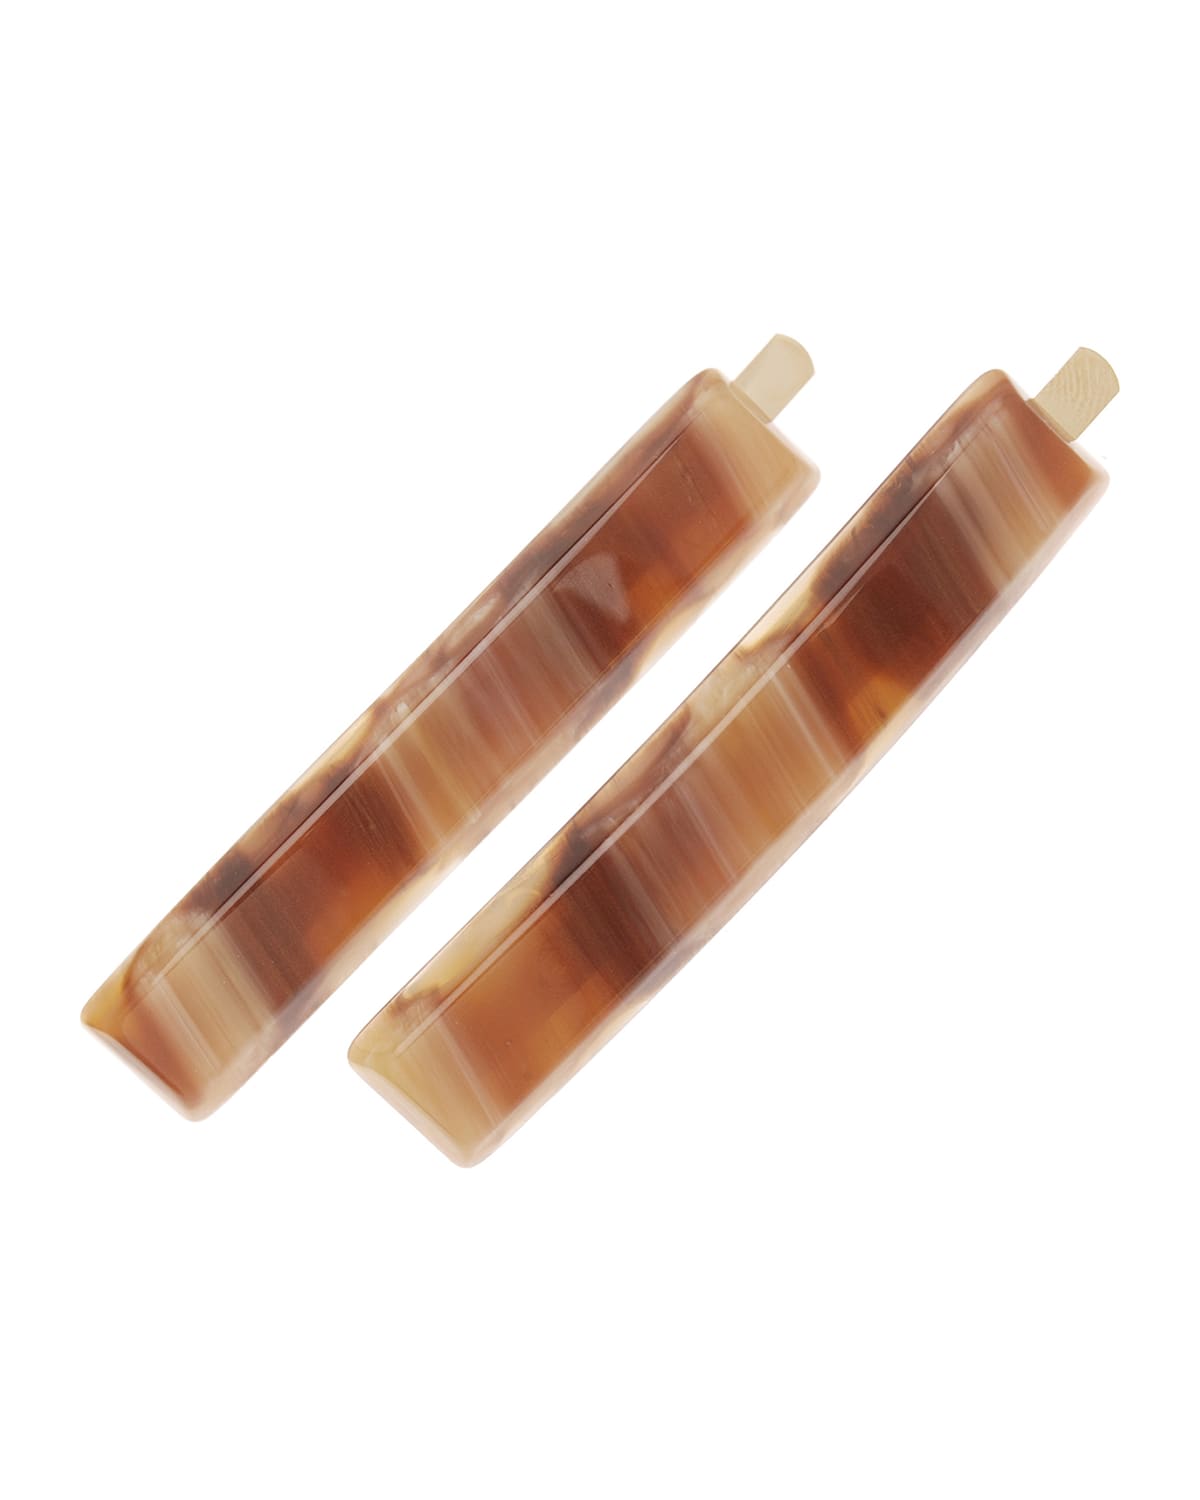 France Luxe Mod Bobby Pin Pair - Classic In Caramel Horn